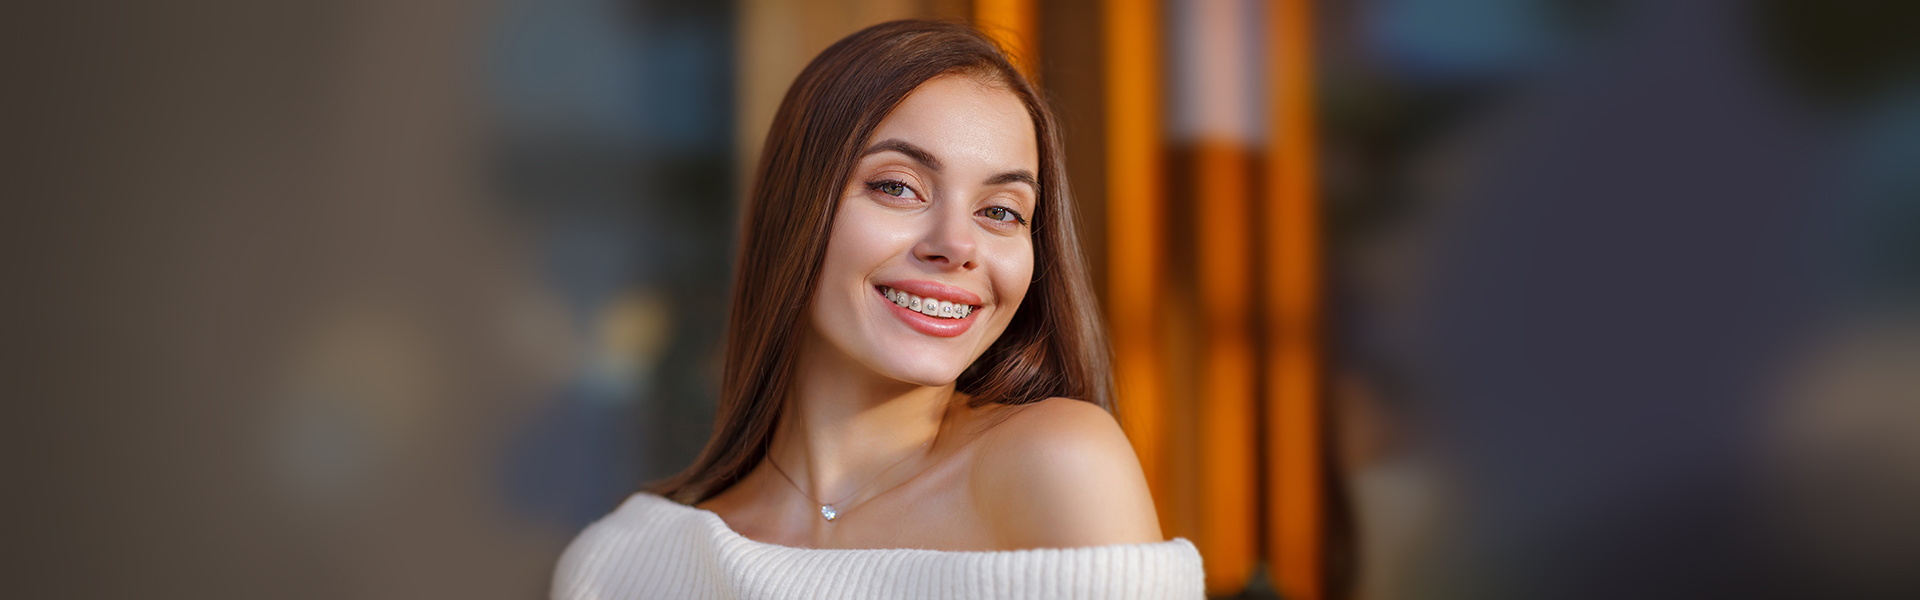 Can braces fix teeth permanently?